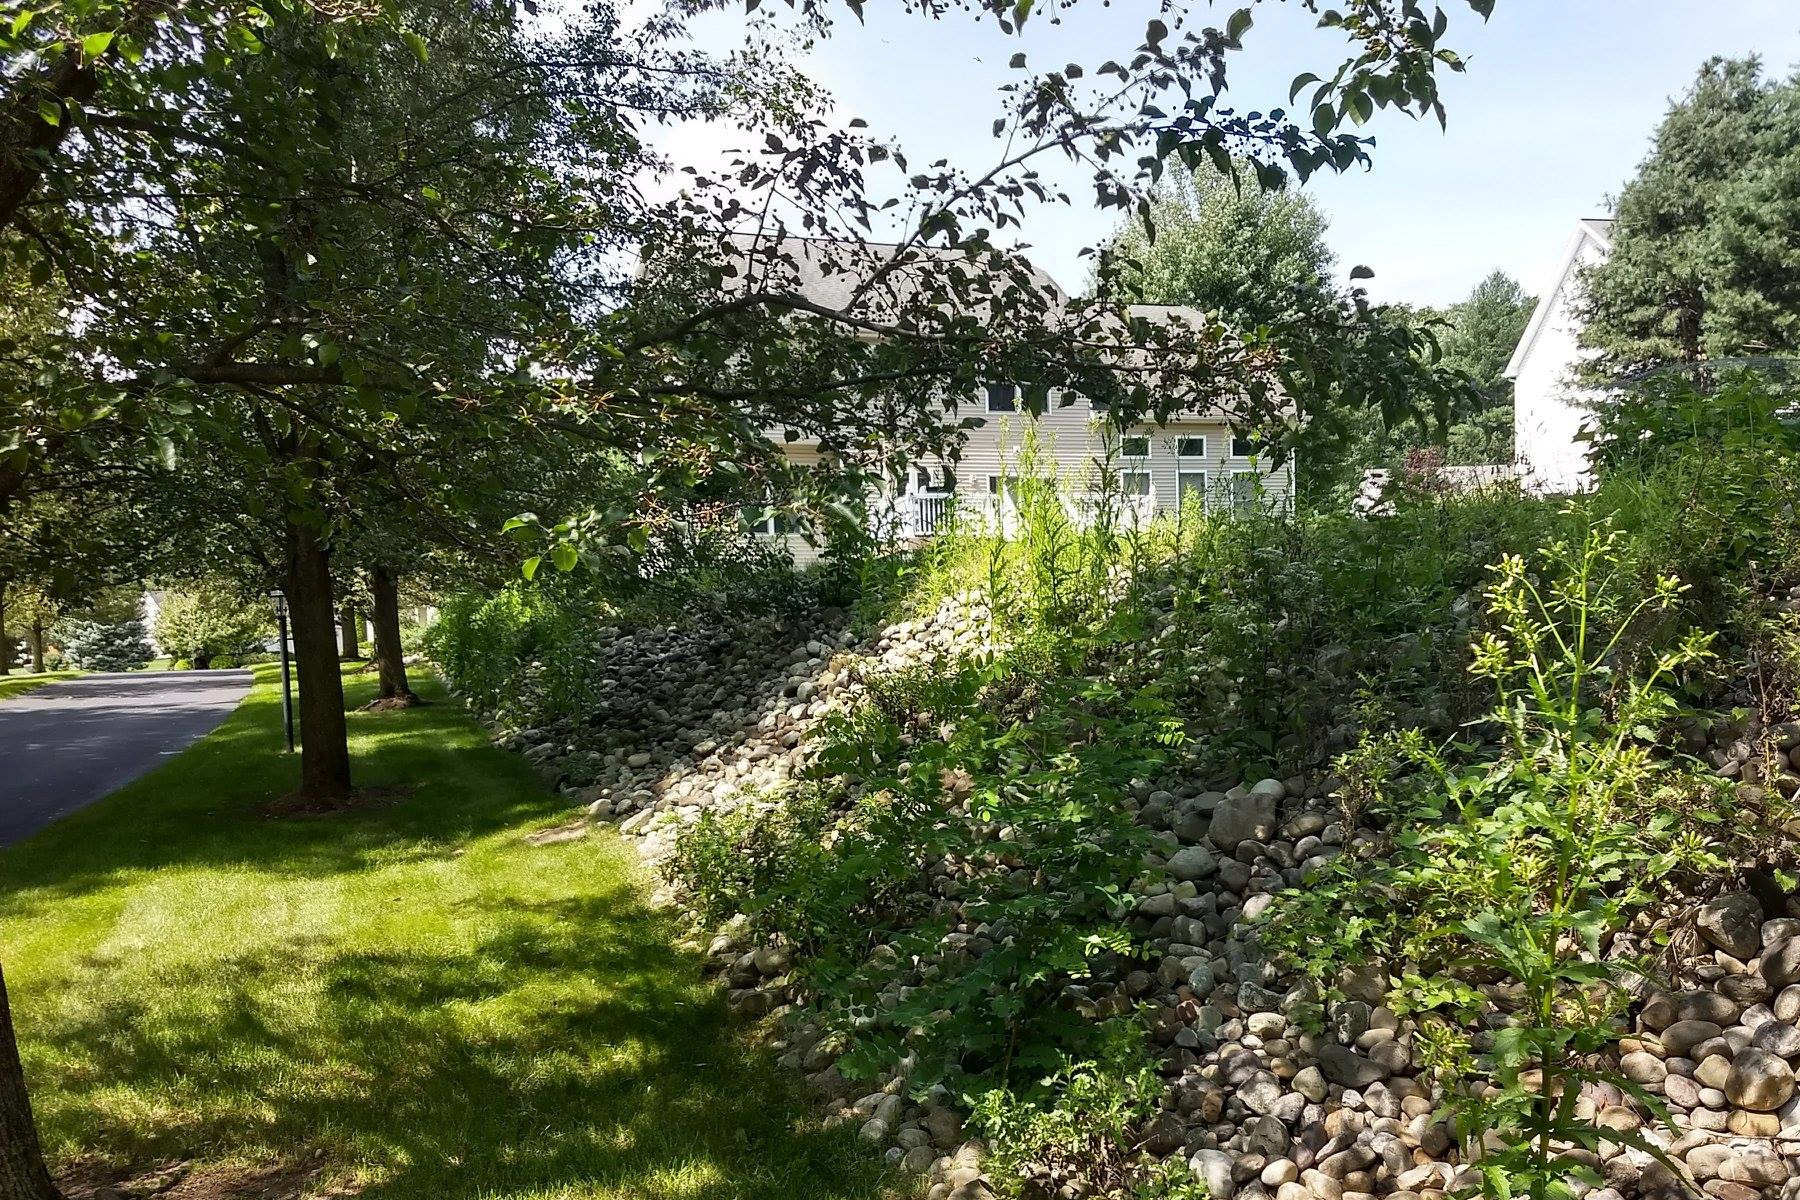 Thumbnail of an overgrown stone retaining wall and tree mulch beds